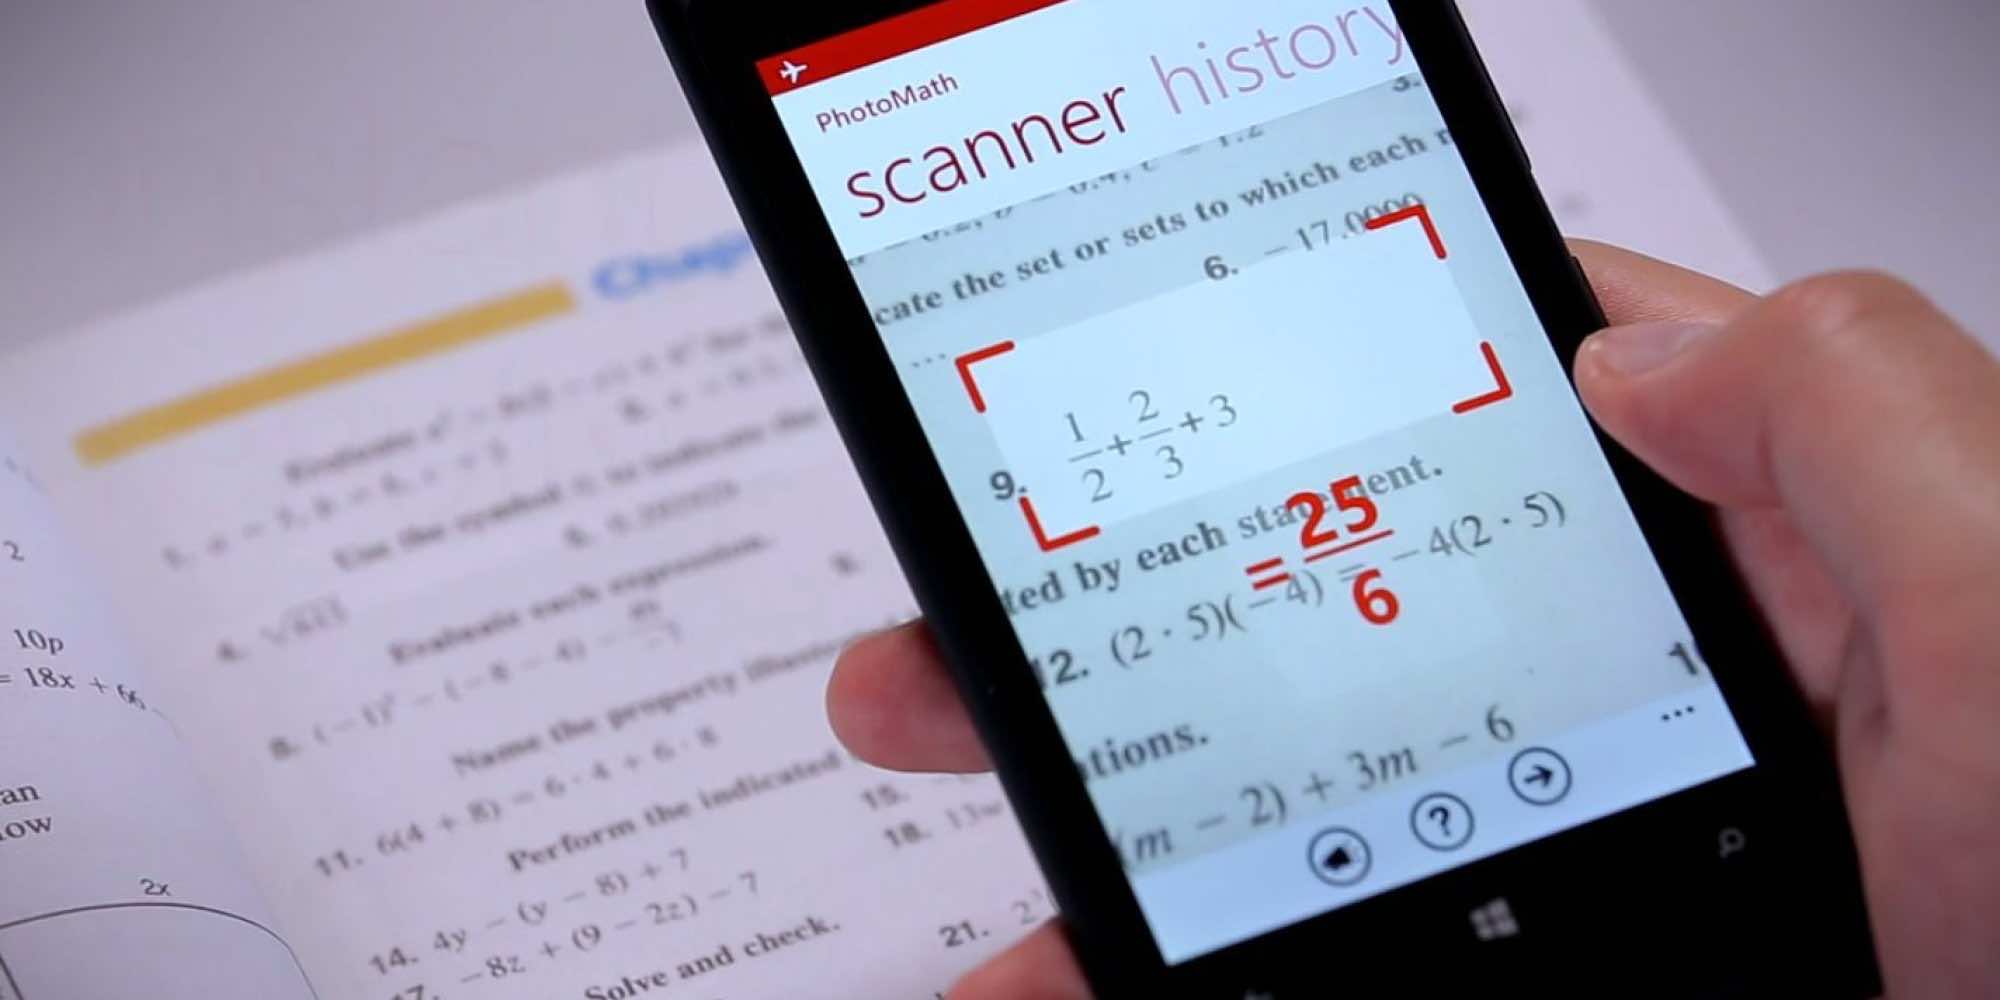 now-solve-mathematical-equations-by-focusing-your-smartphone